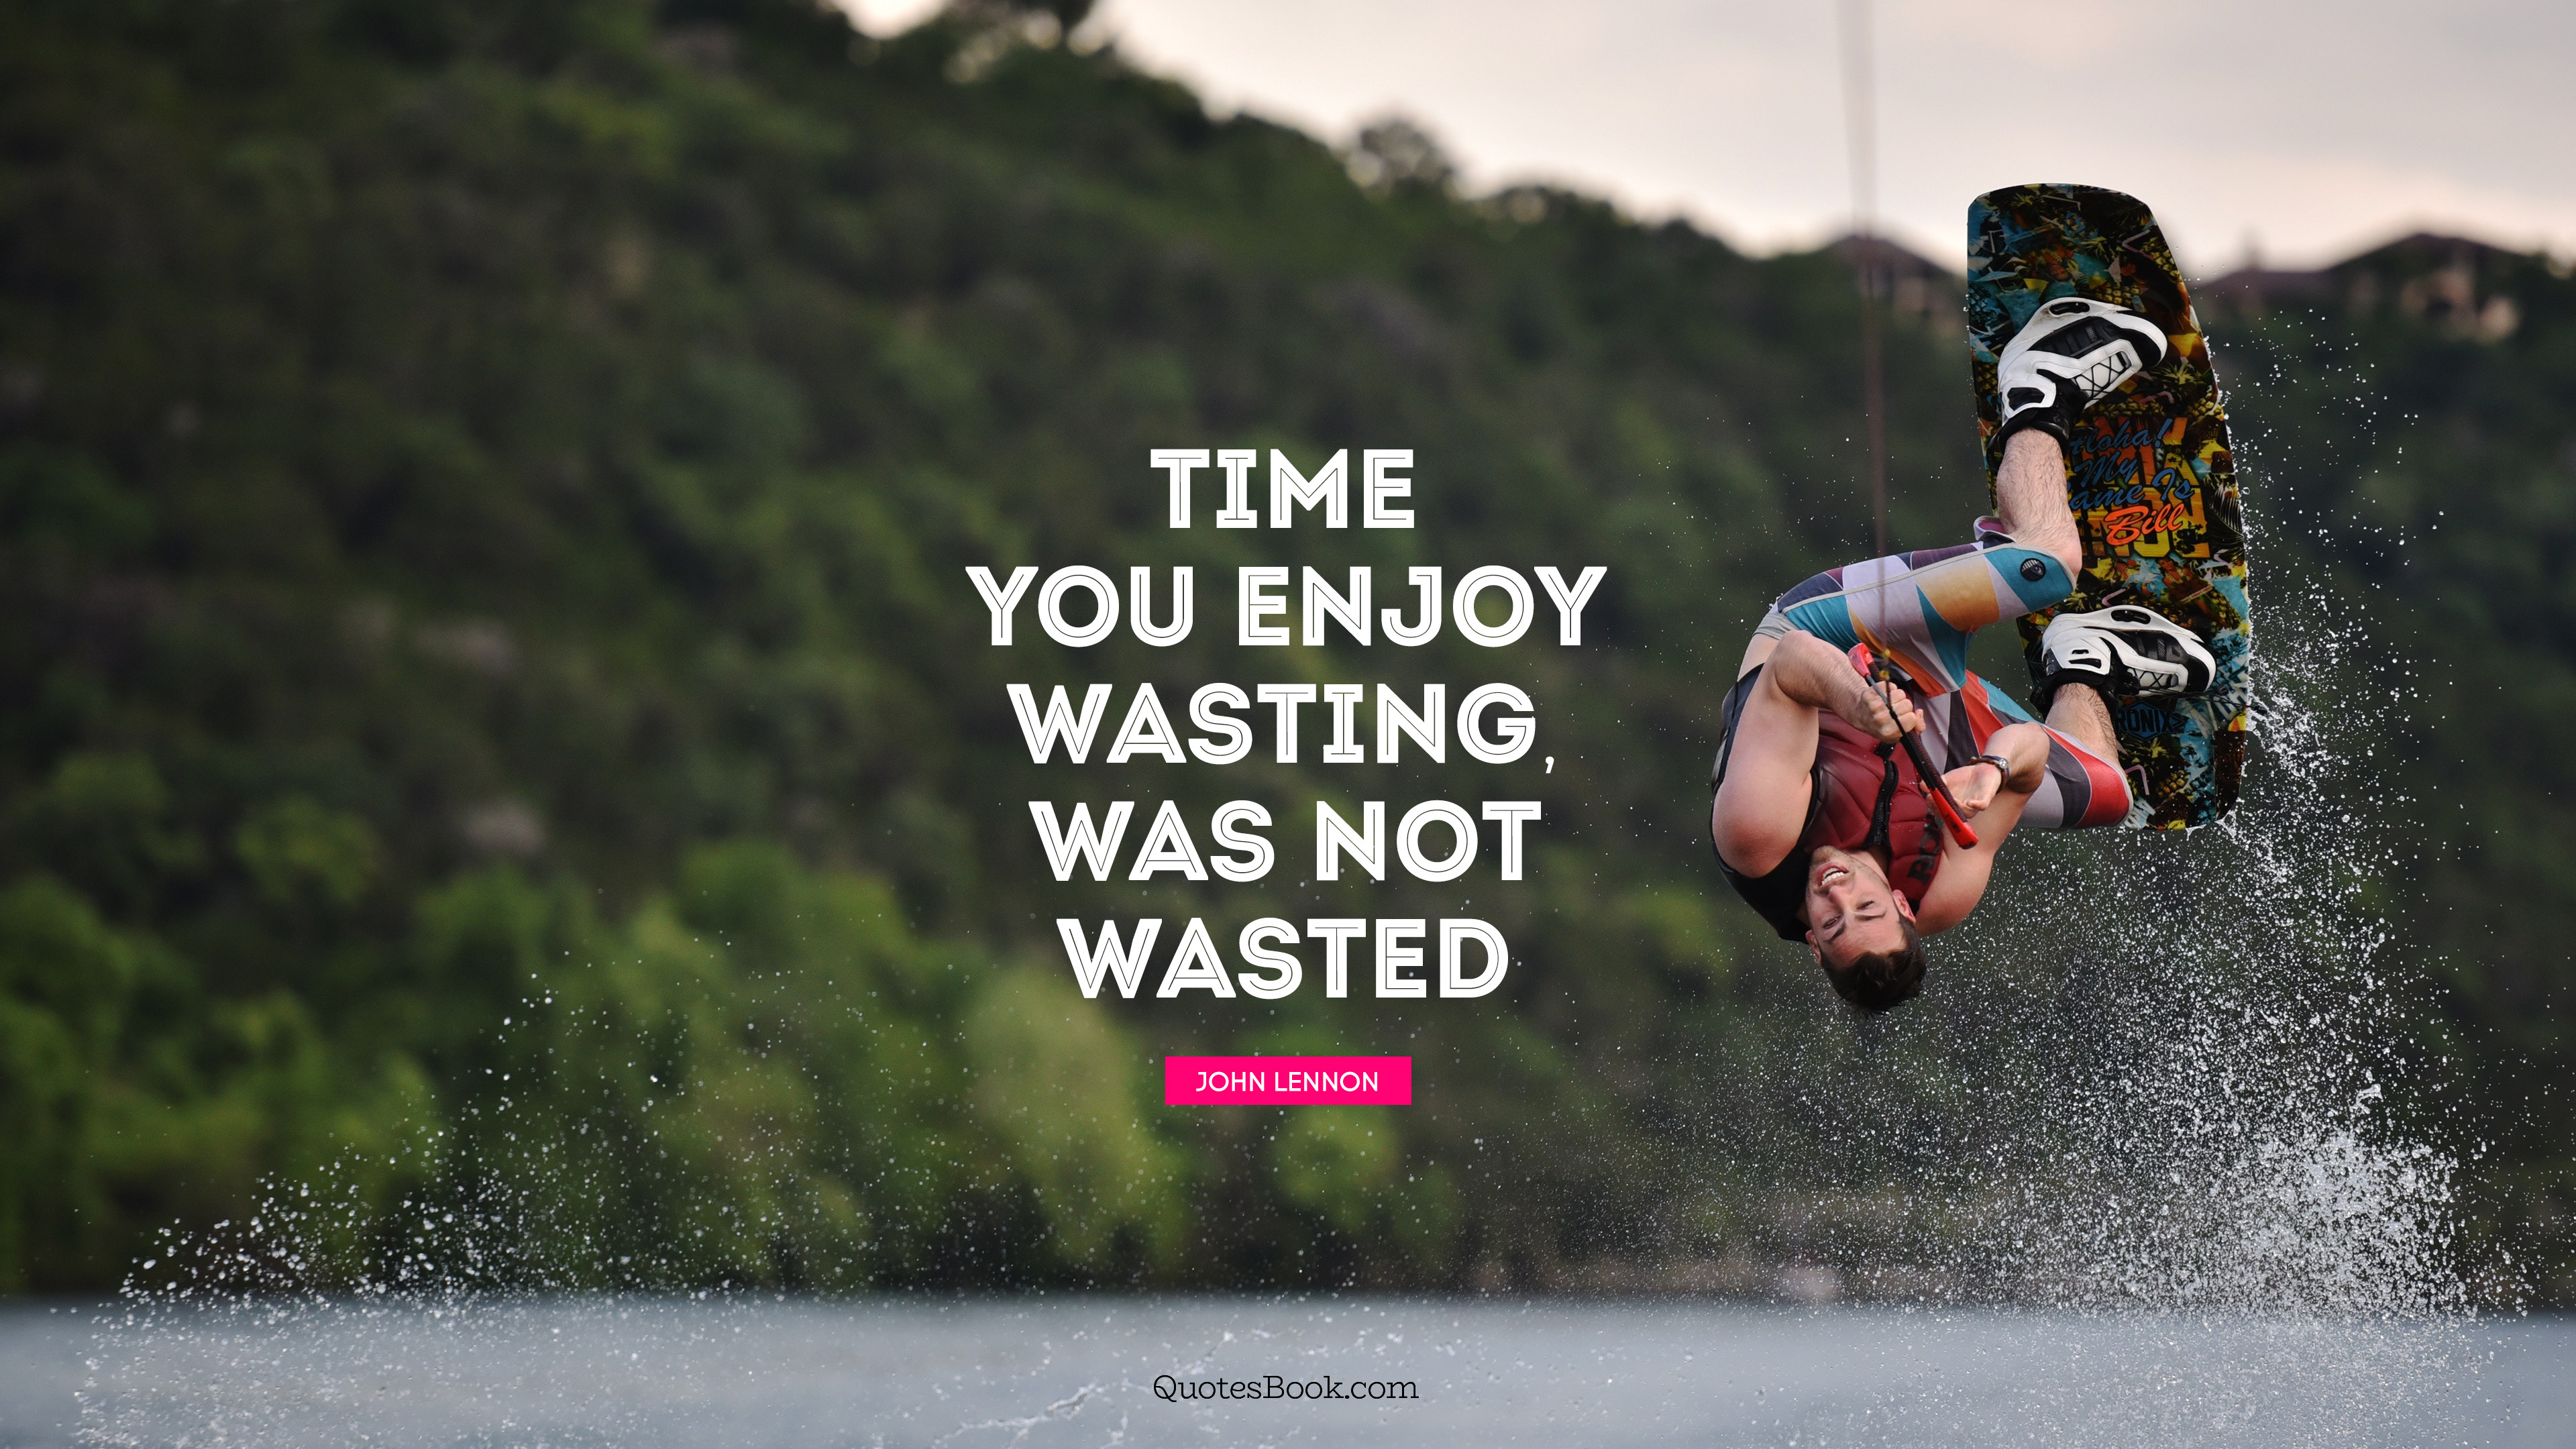 Time you enjoy wasting, was not wasted. - Quote by John Lennon - QuotesBook